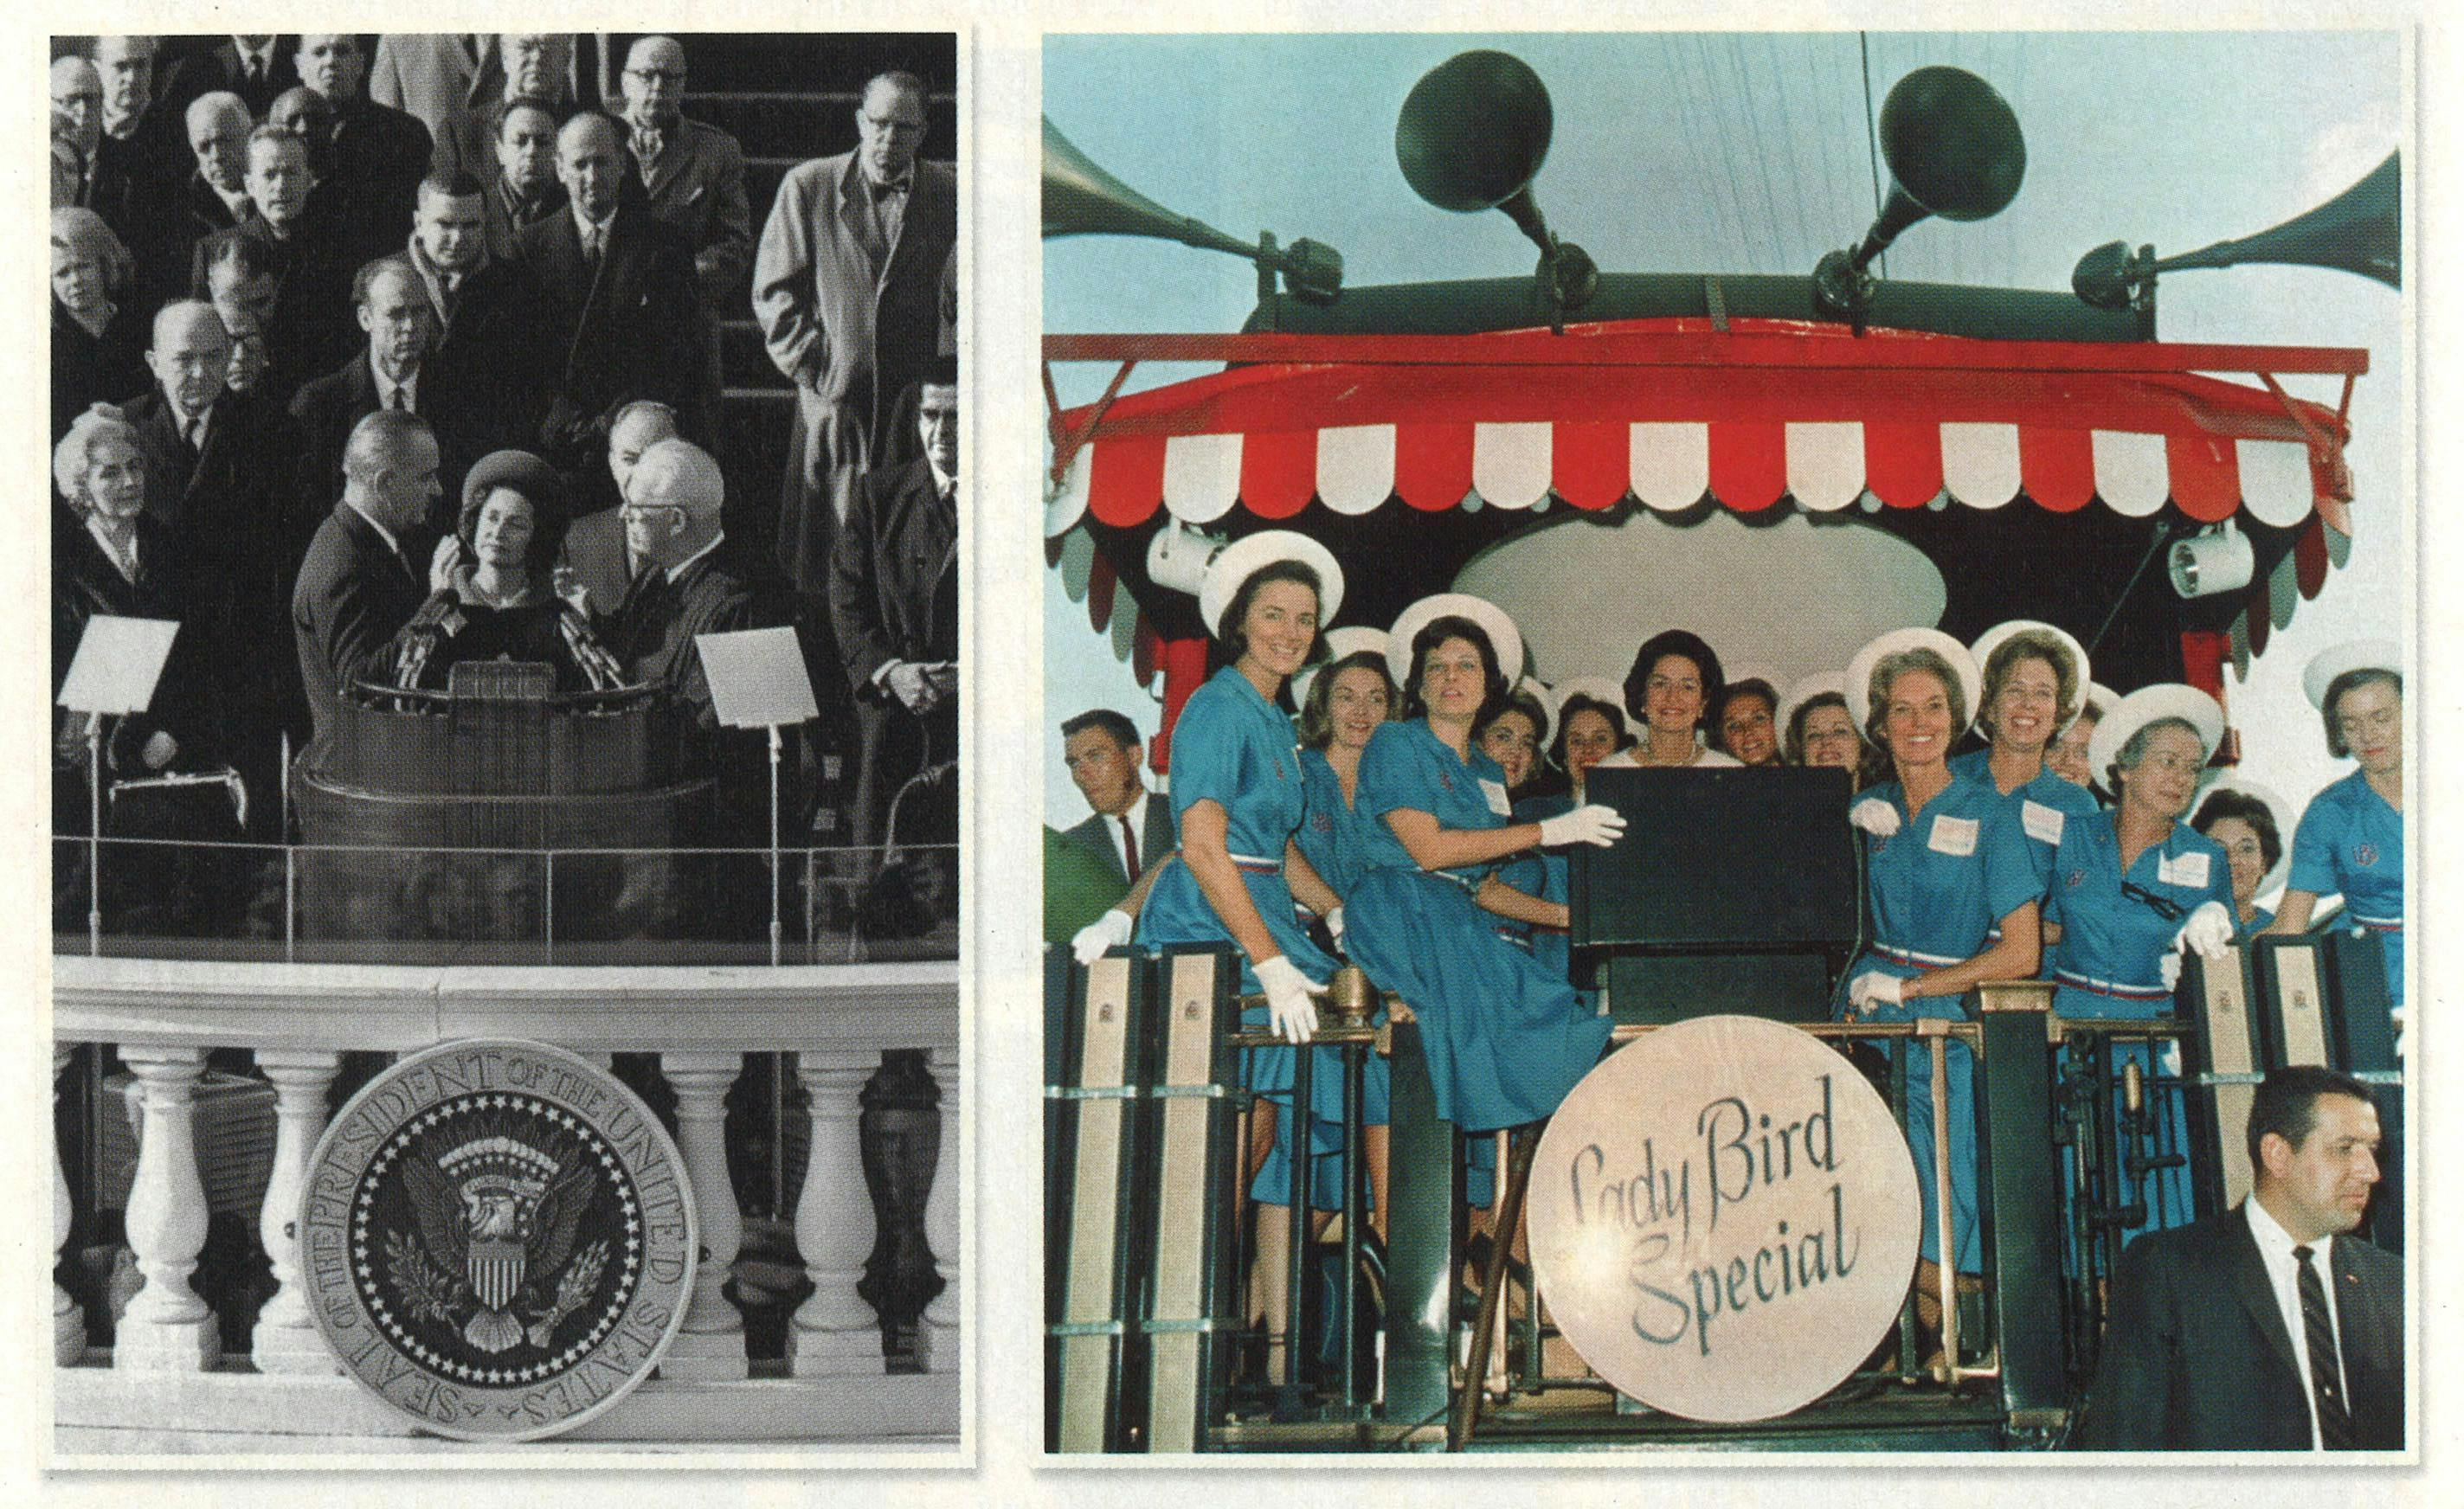 From left: At Lyndon's inauguration in 1965. Riding through the South on the Lady Bird Special during the 1964 campaign.